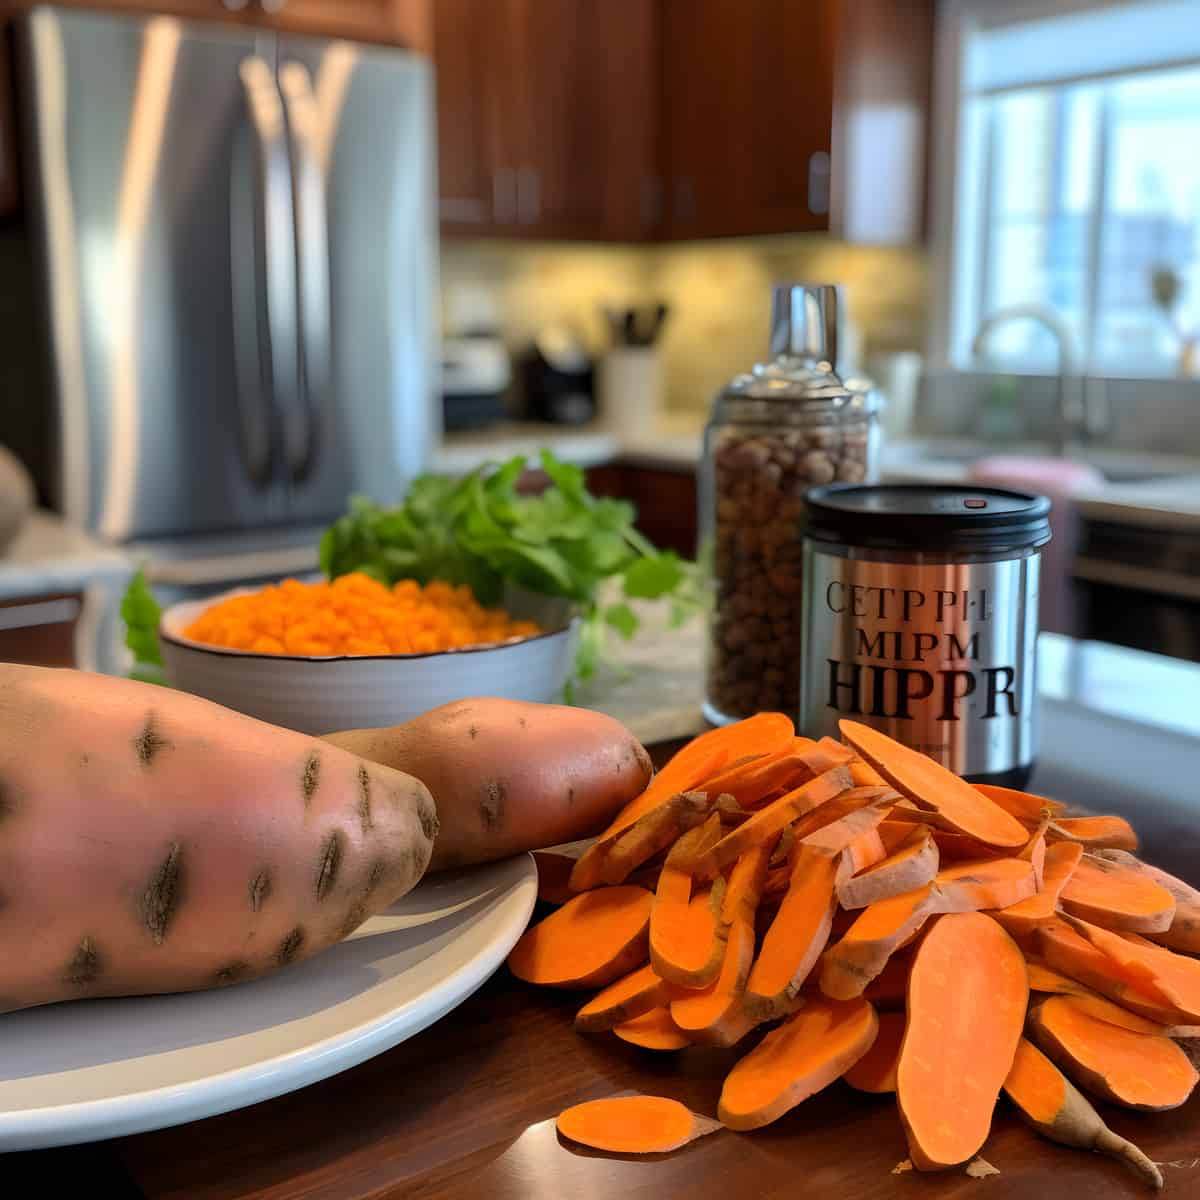 Chipper Sweet Potatoes on a kitchen counter